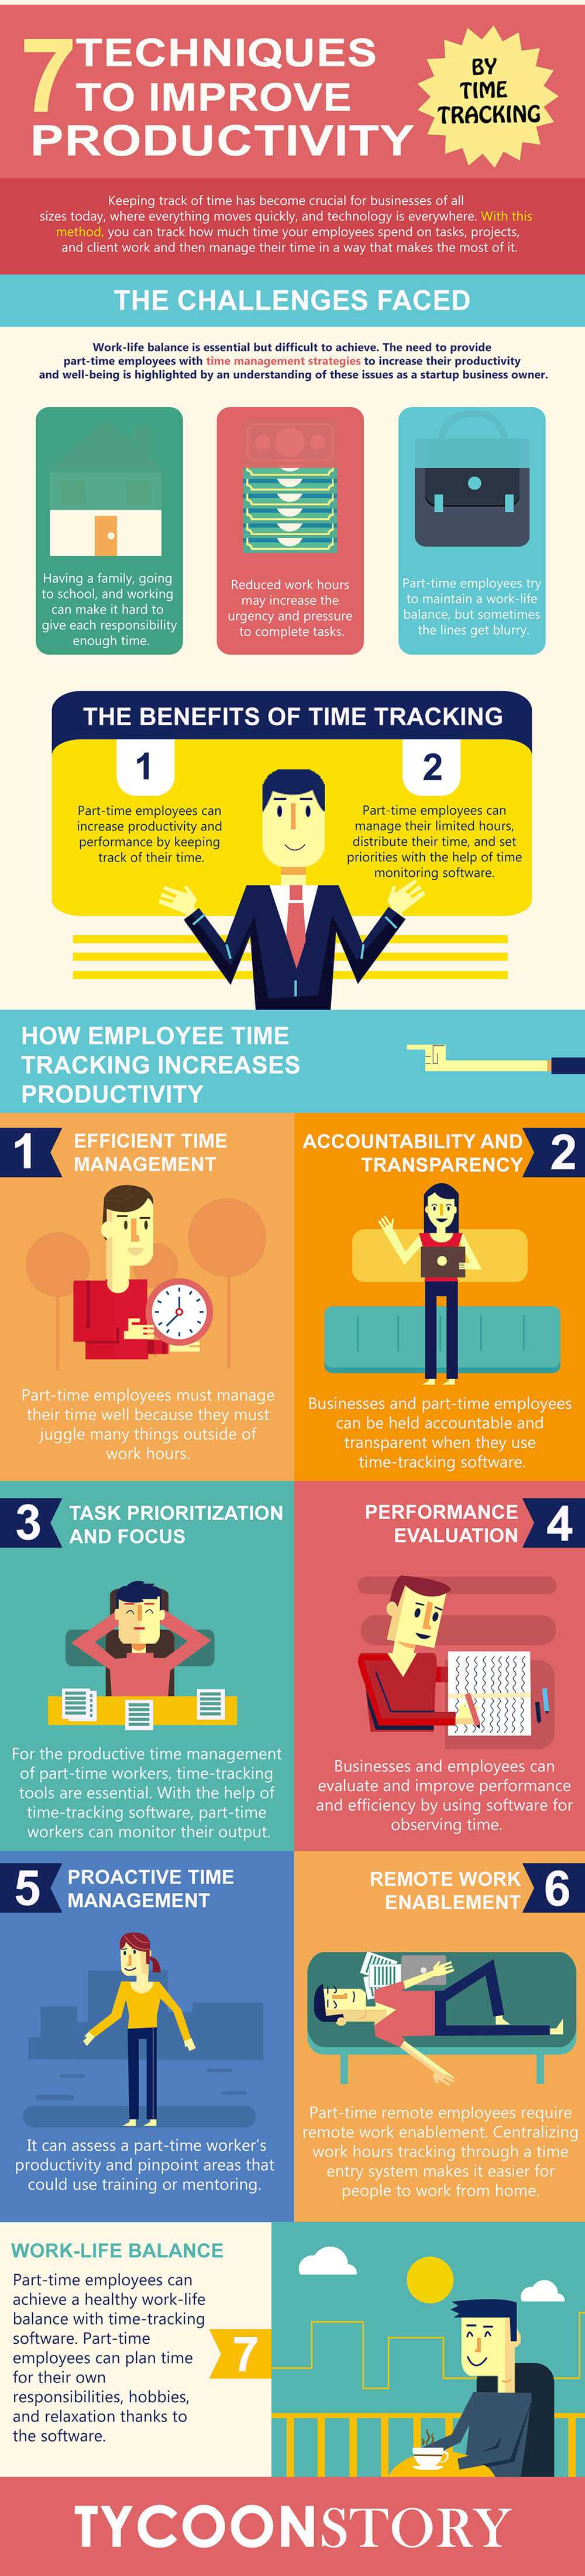 Empowering part-time workers to be more productive through time tracking